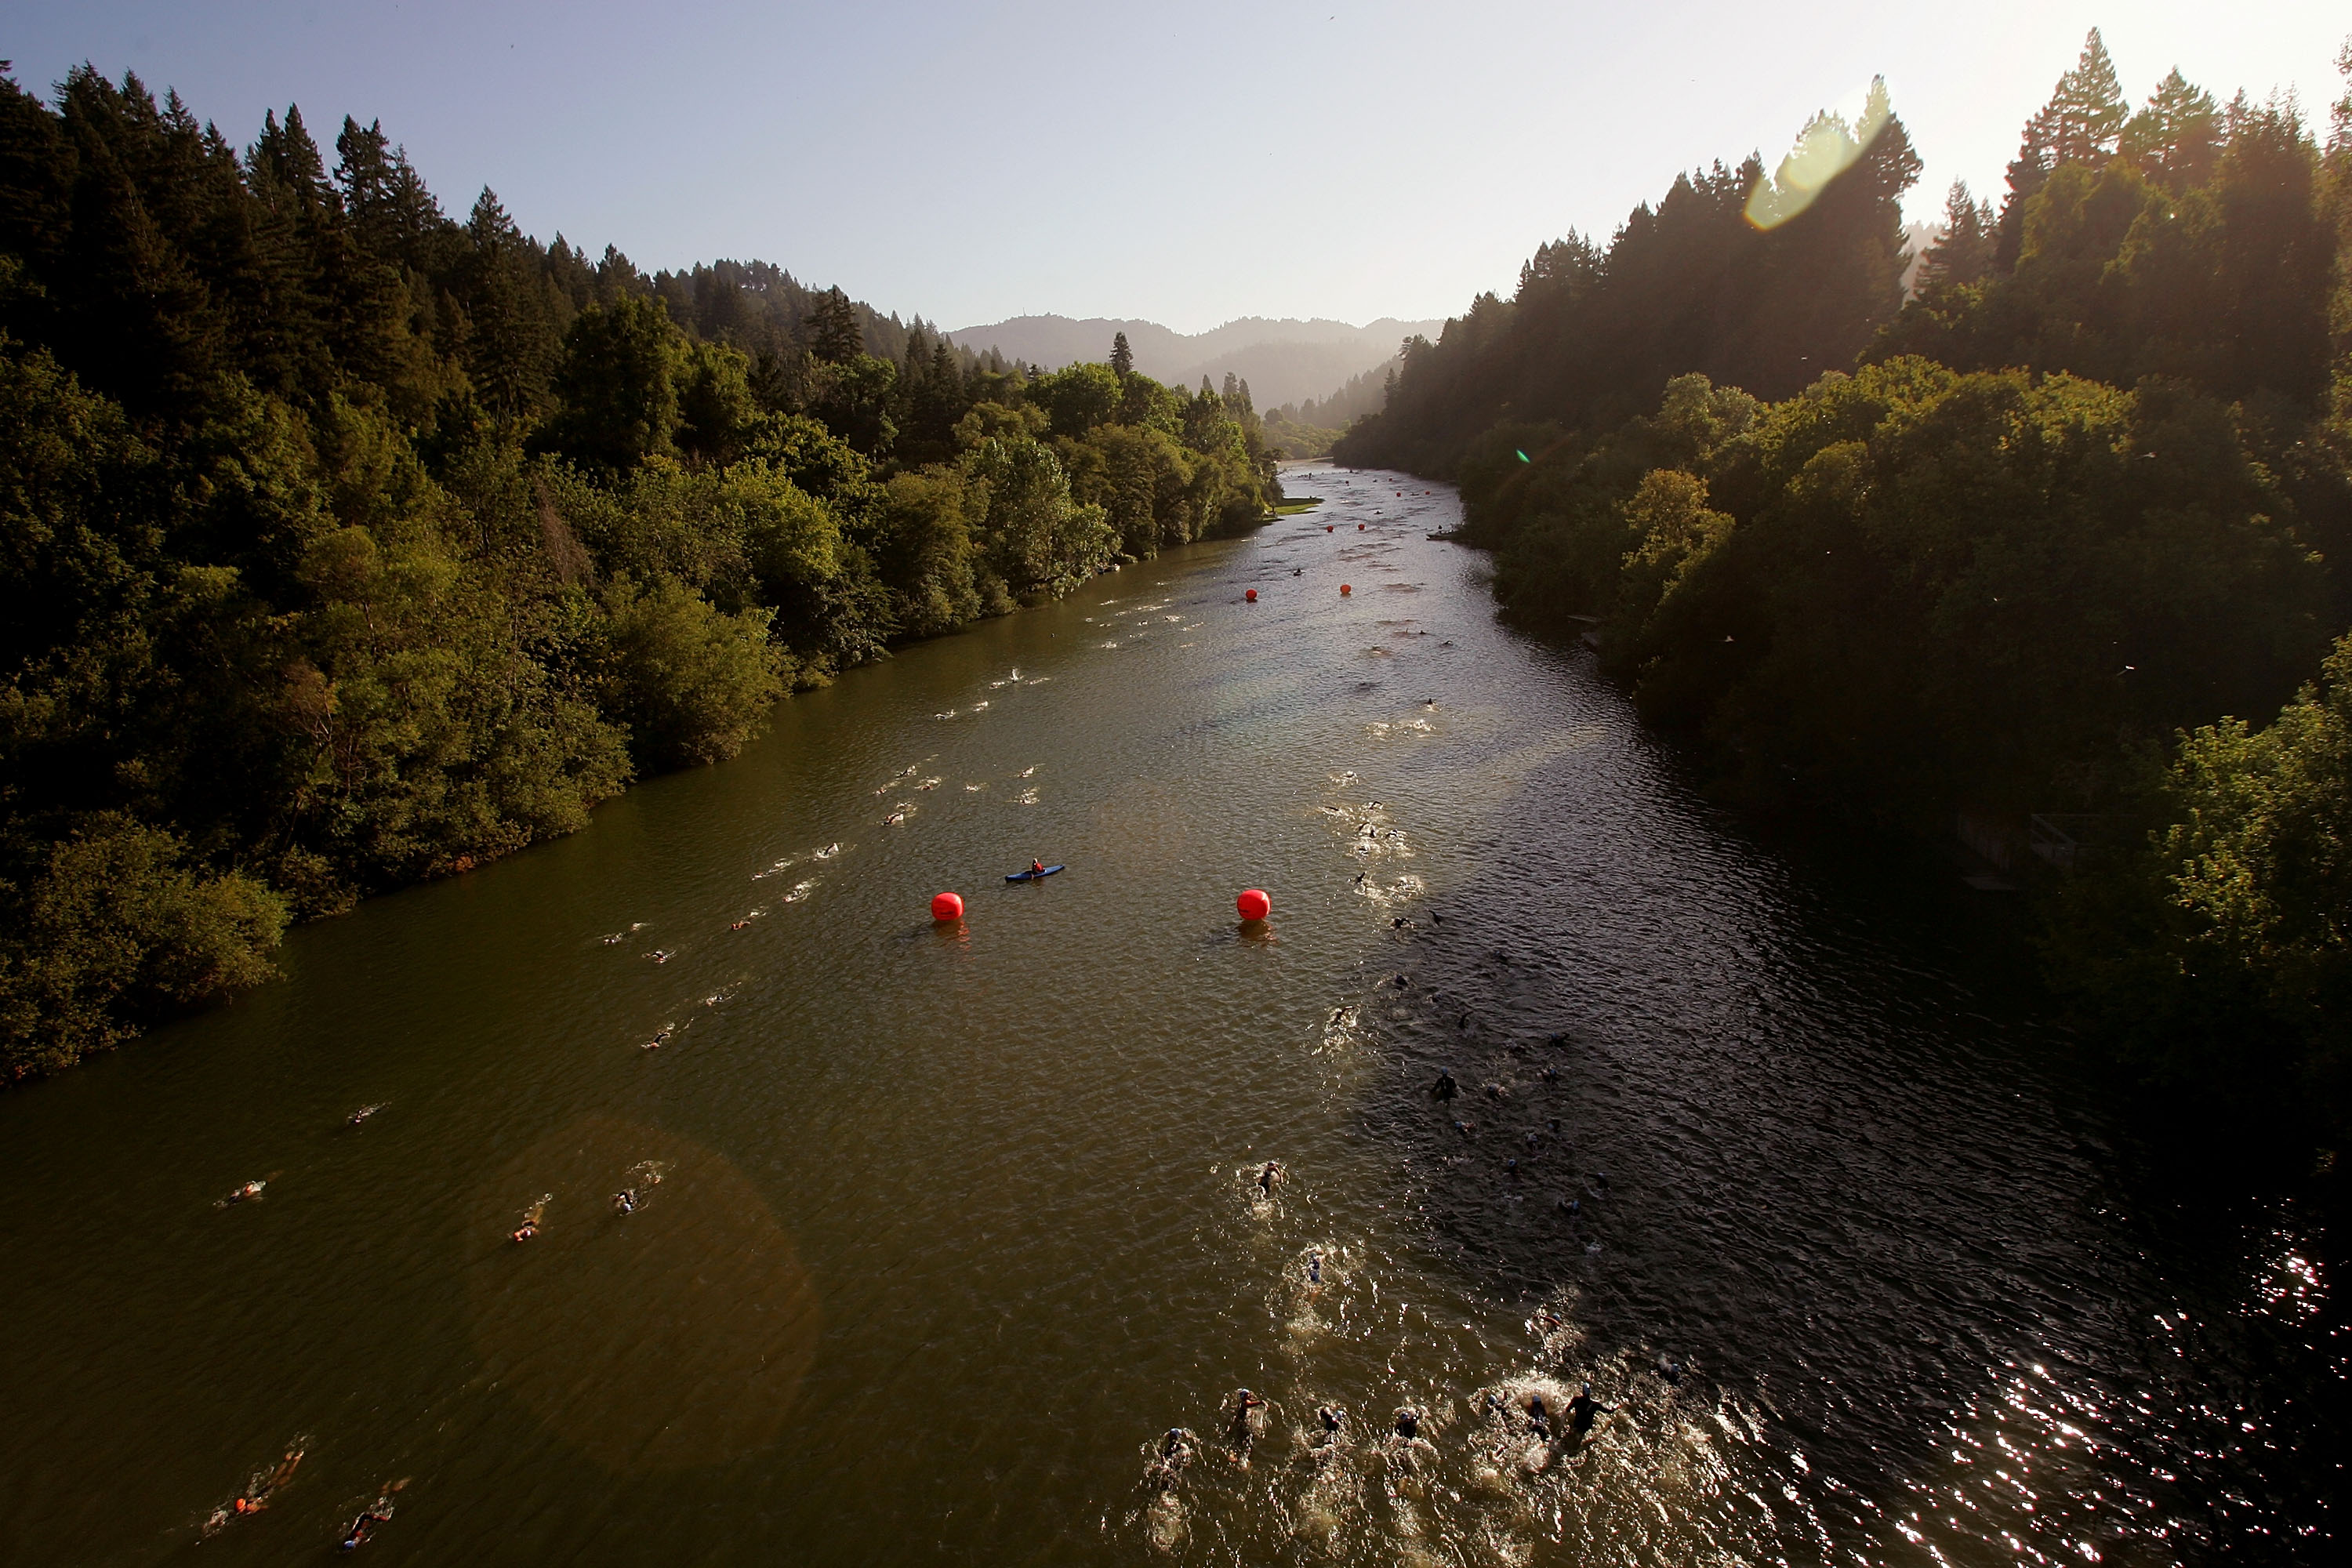 A river, surrounded by dense trees on both sides, has numerous swimmers spread out across it, with orange buoys and a person in a kayak visible among them.